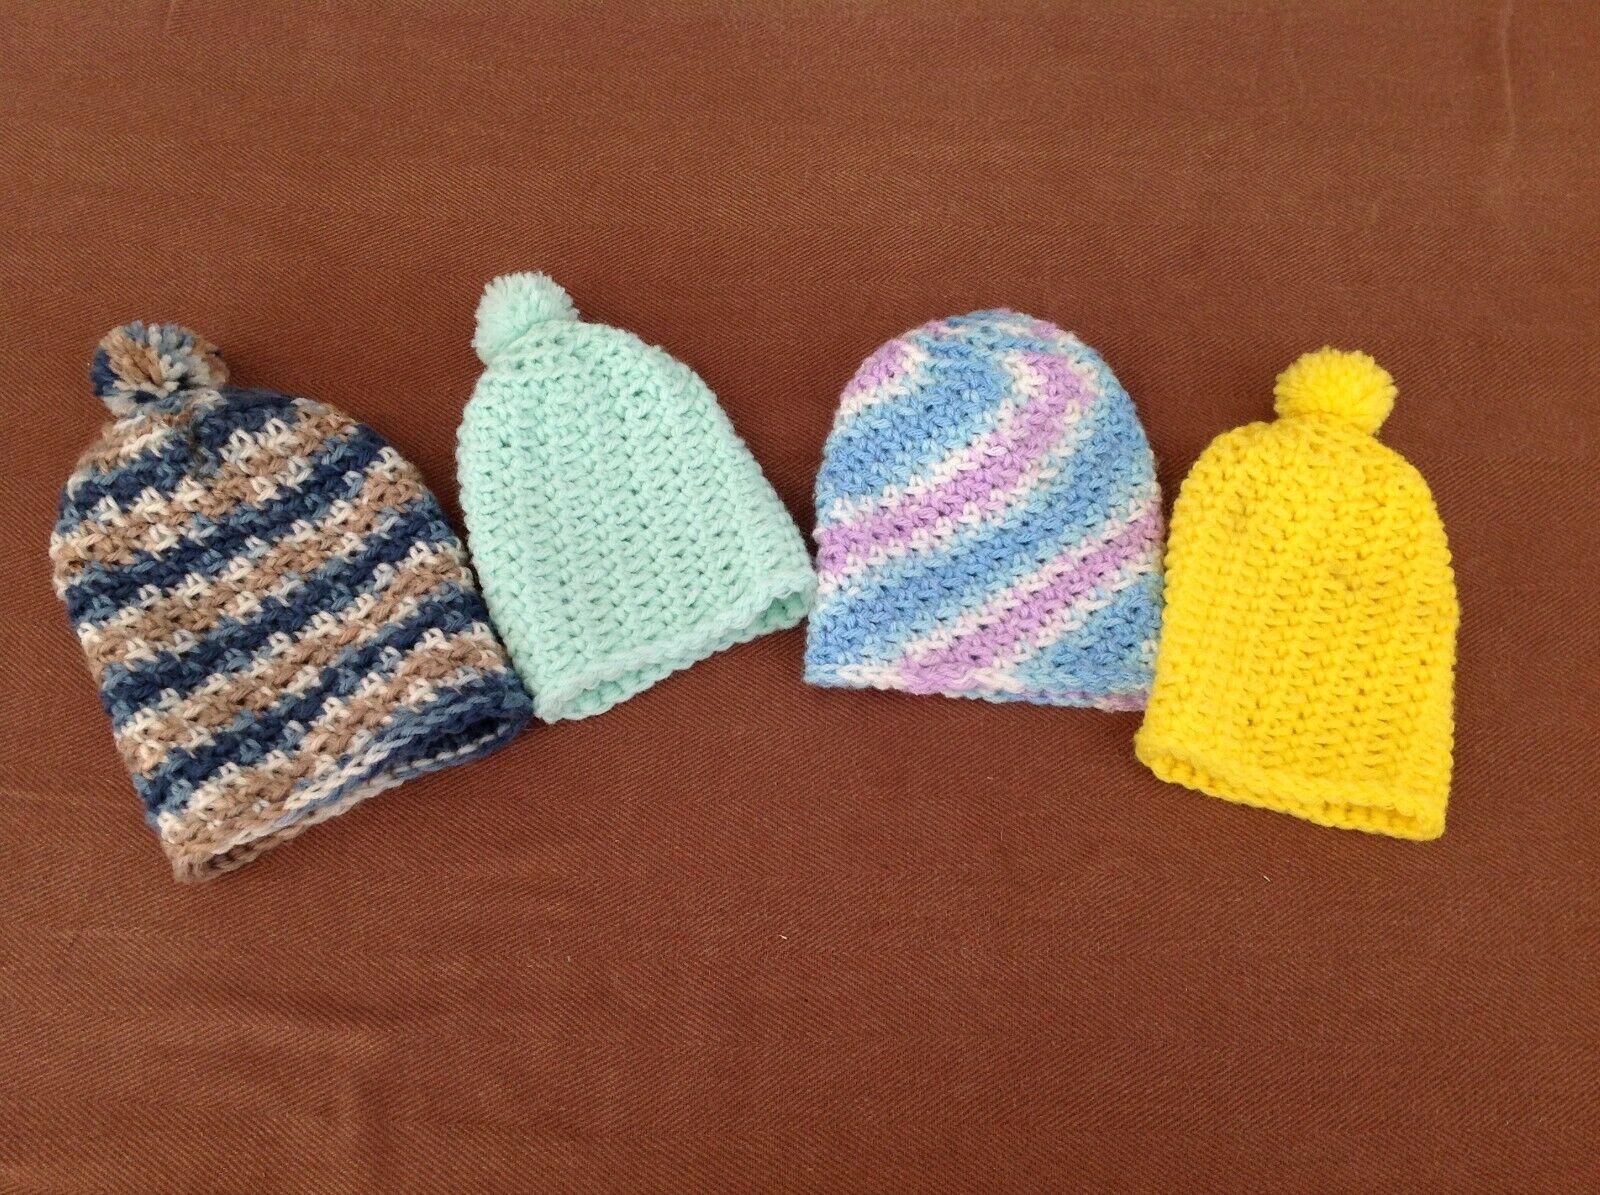 4 Vintage Crocheted Hats